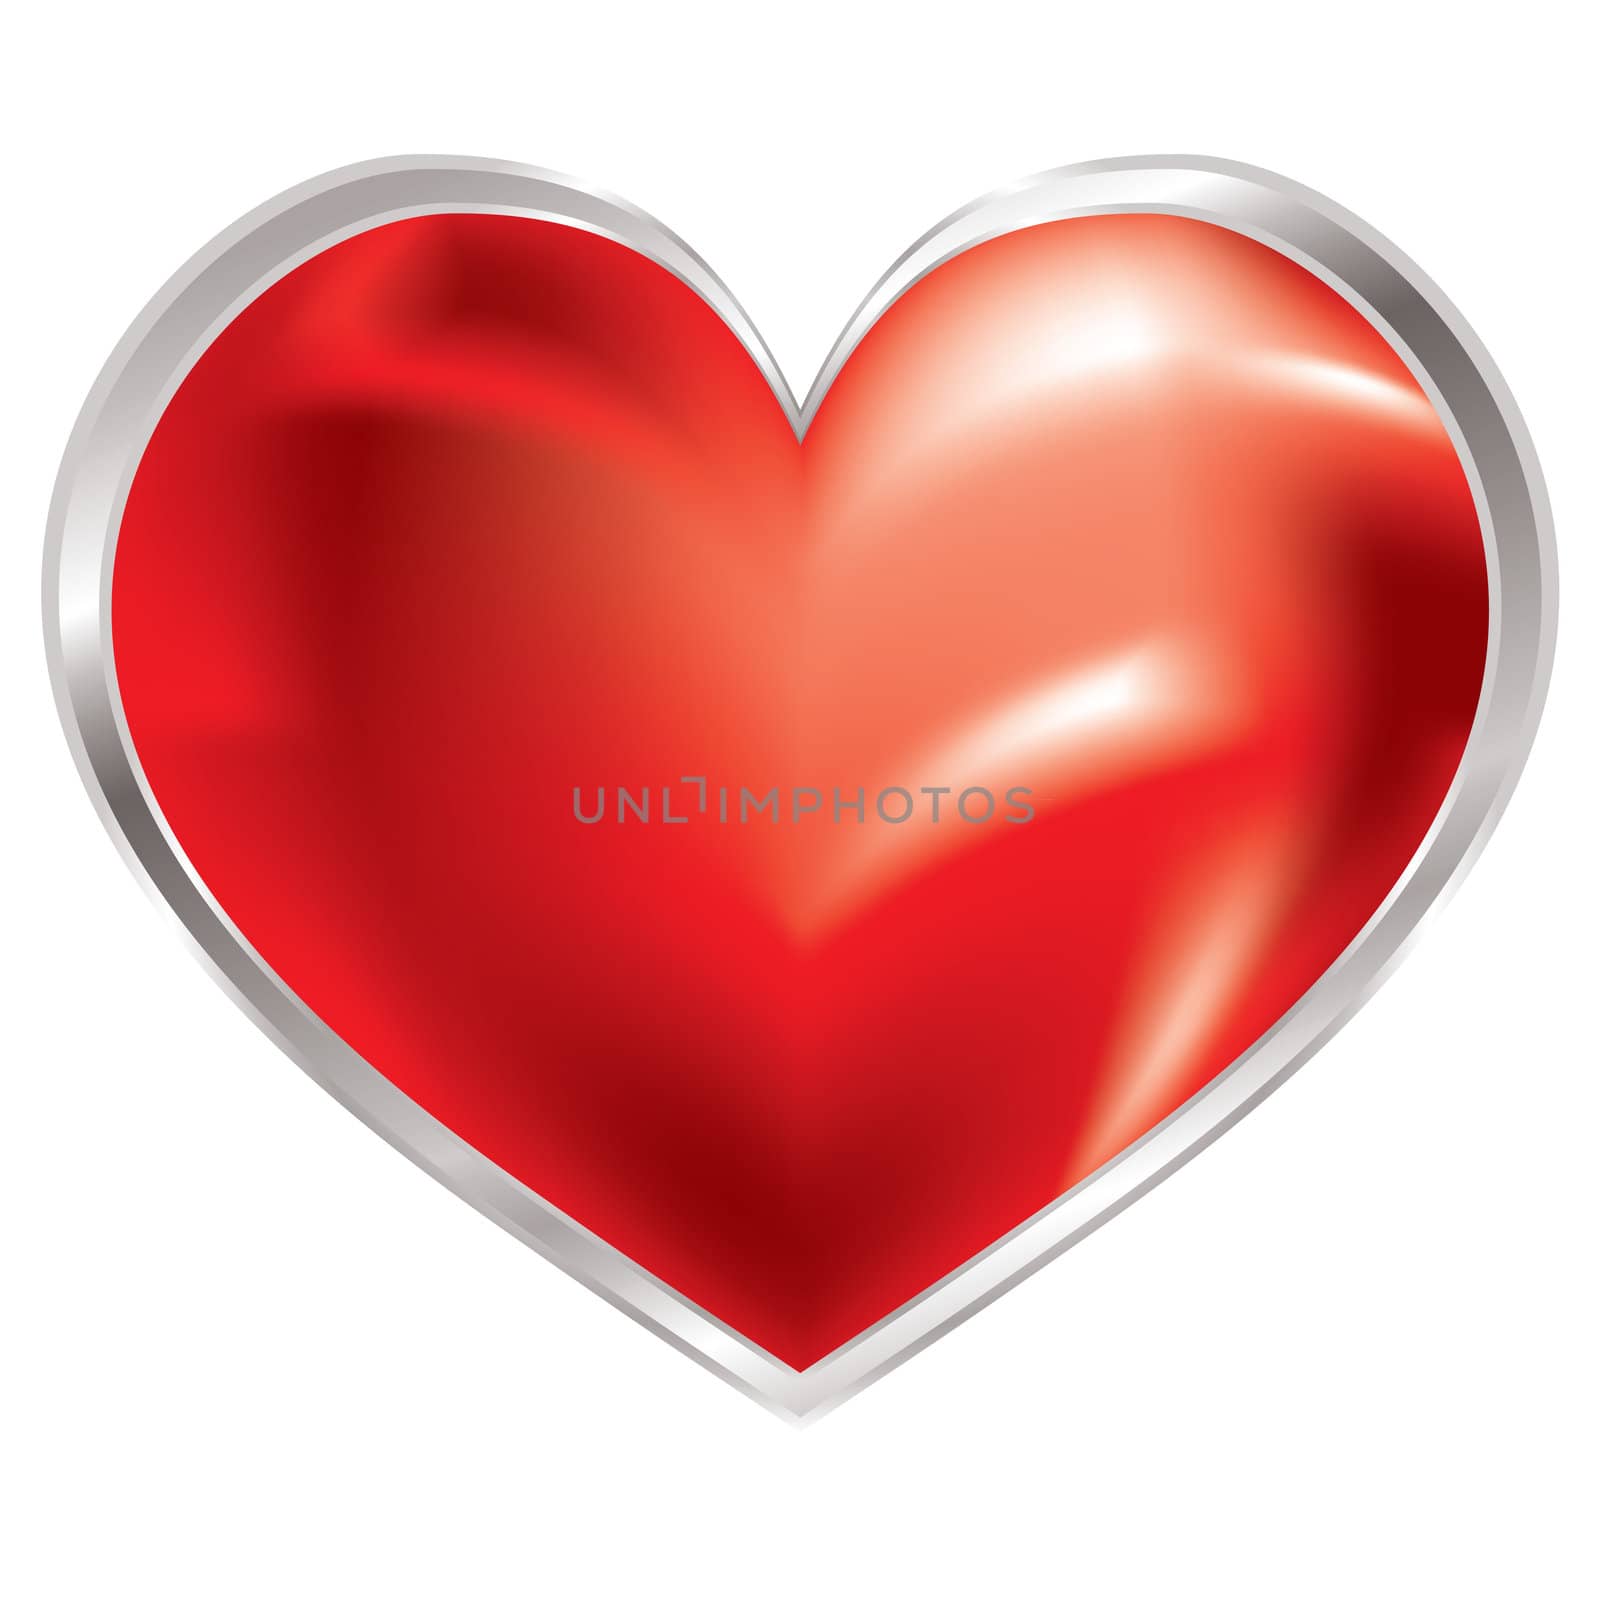 Love heart with silver bevel and shimmering red fluid shape